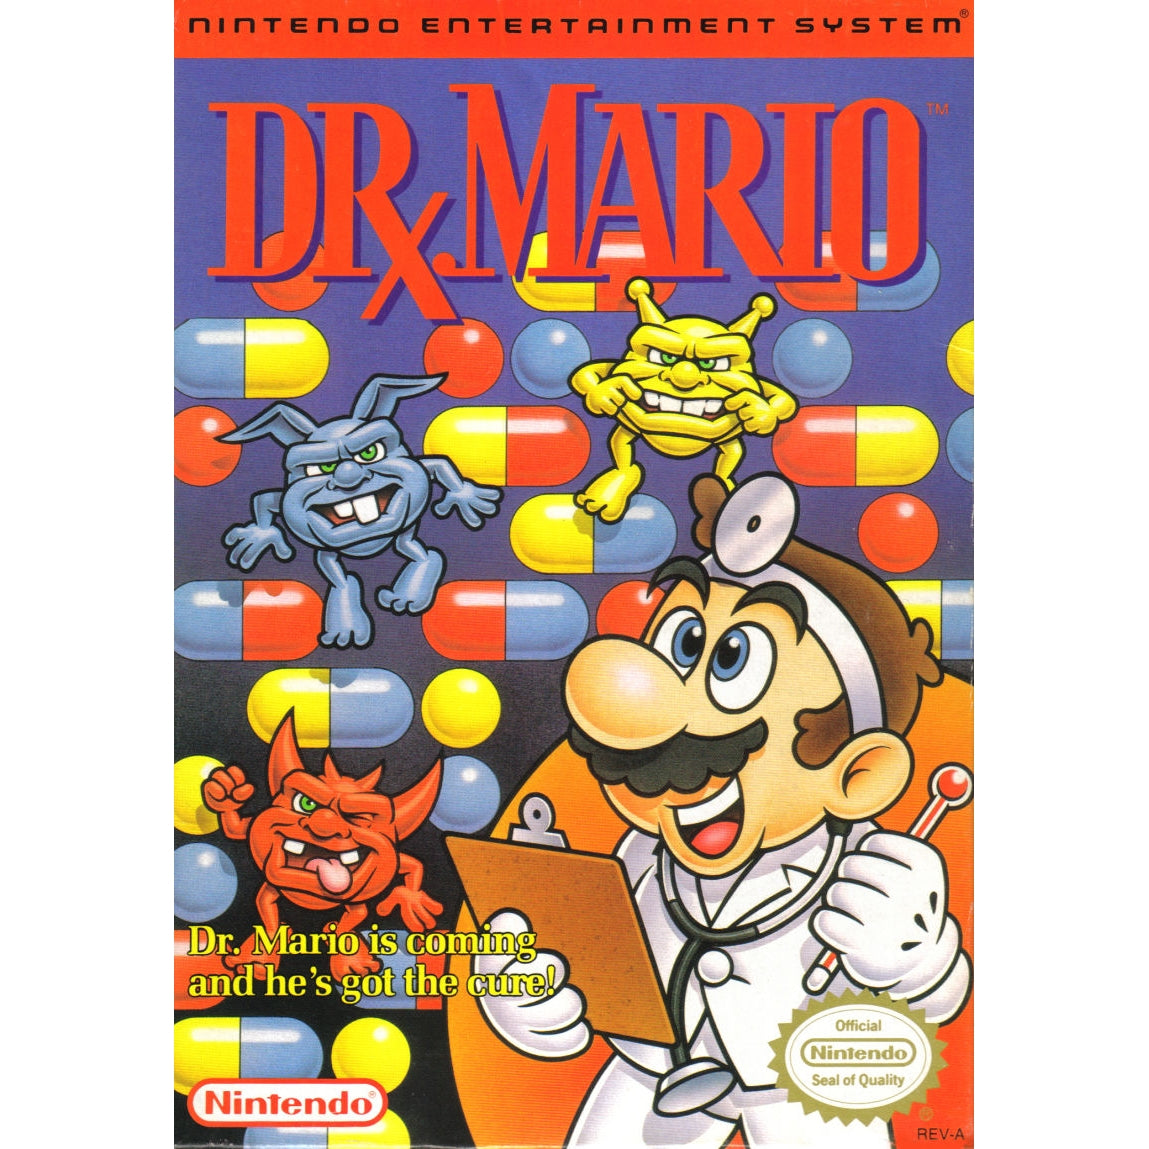 Your Gaming Shop - Dr. Mario - Authentic NES Game Cartridge